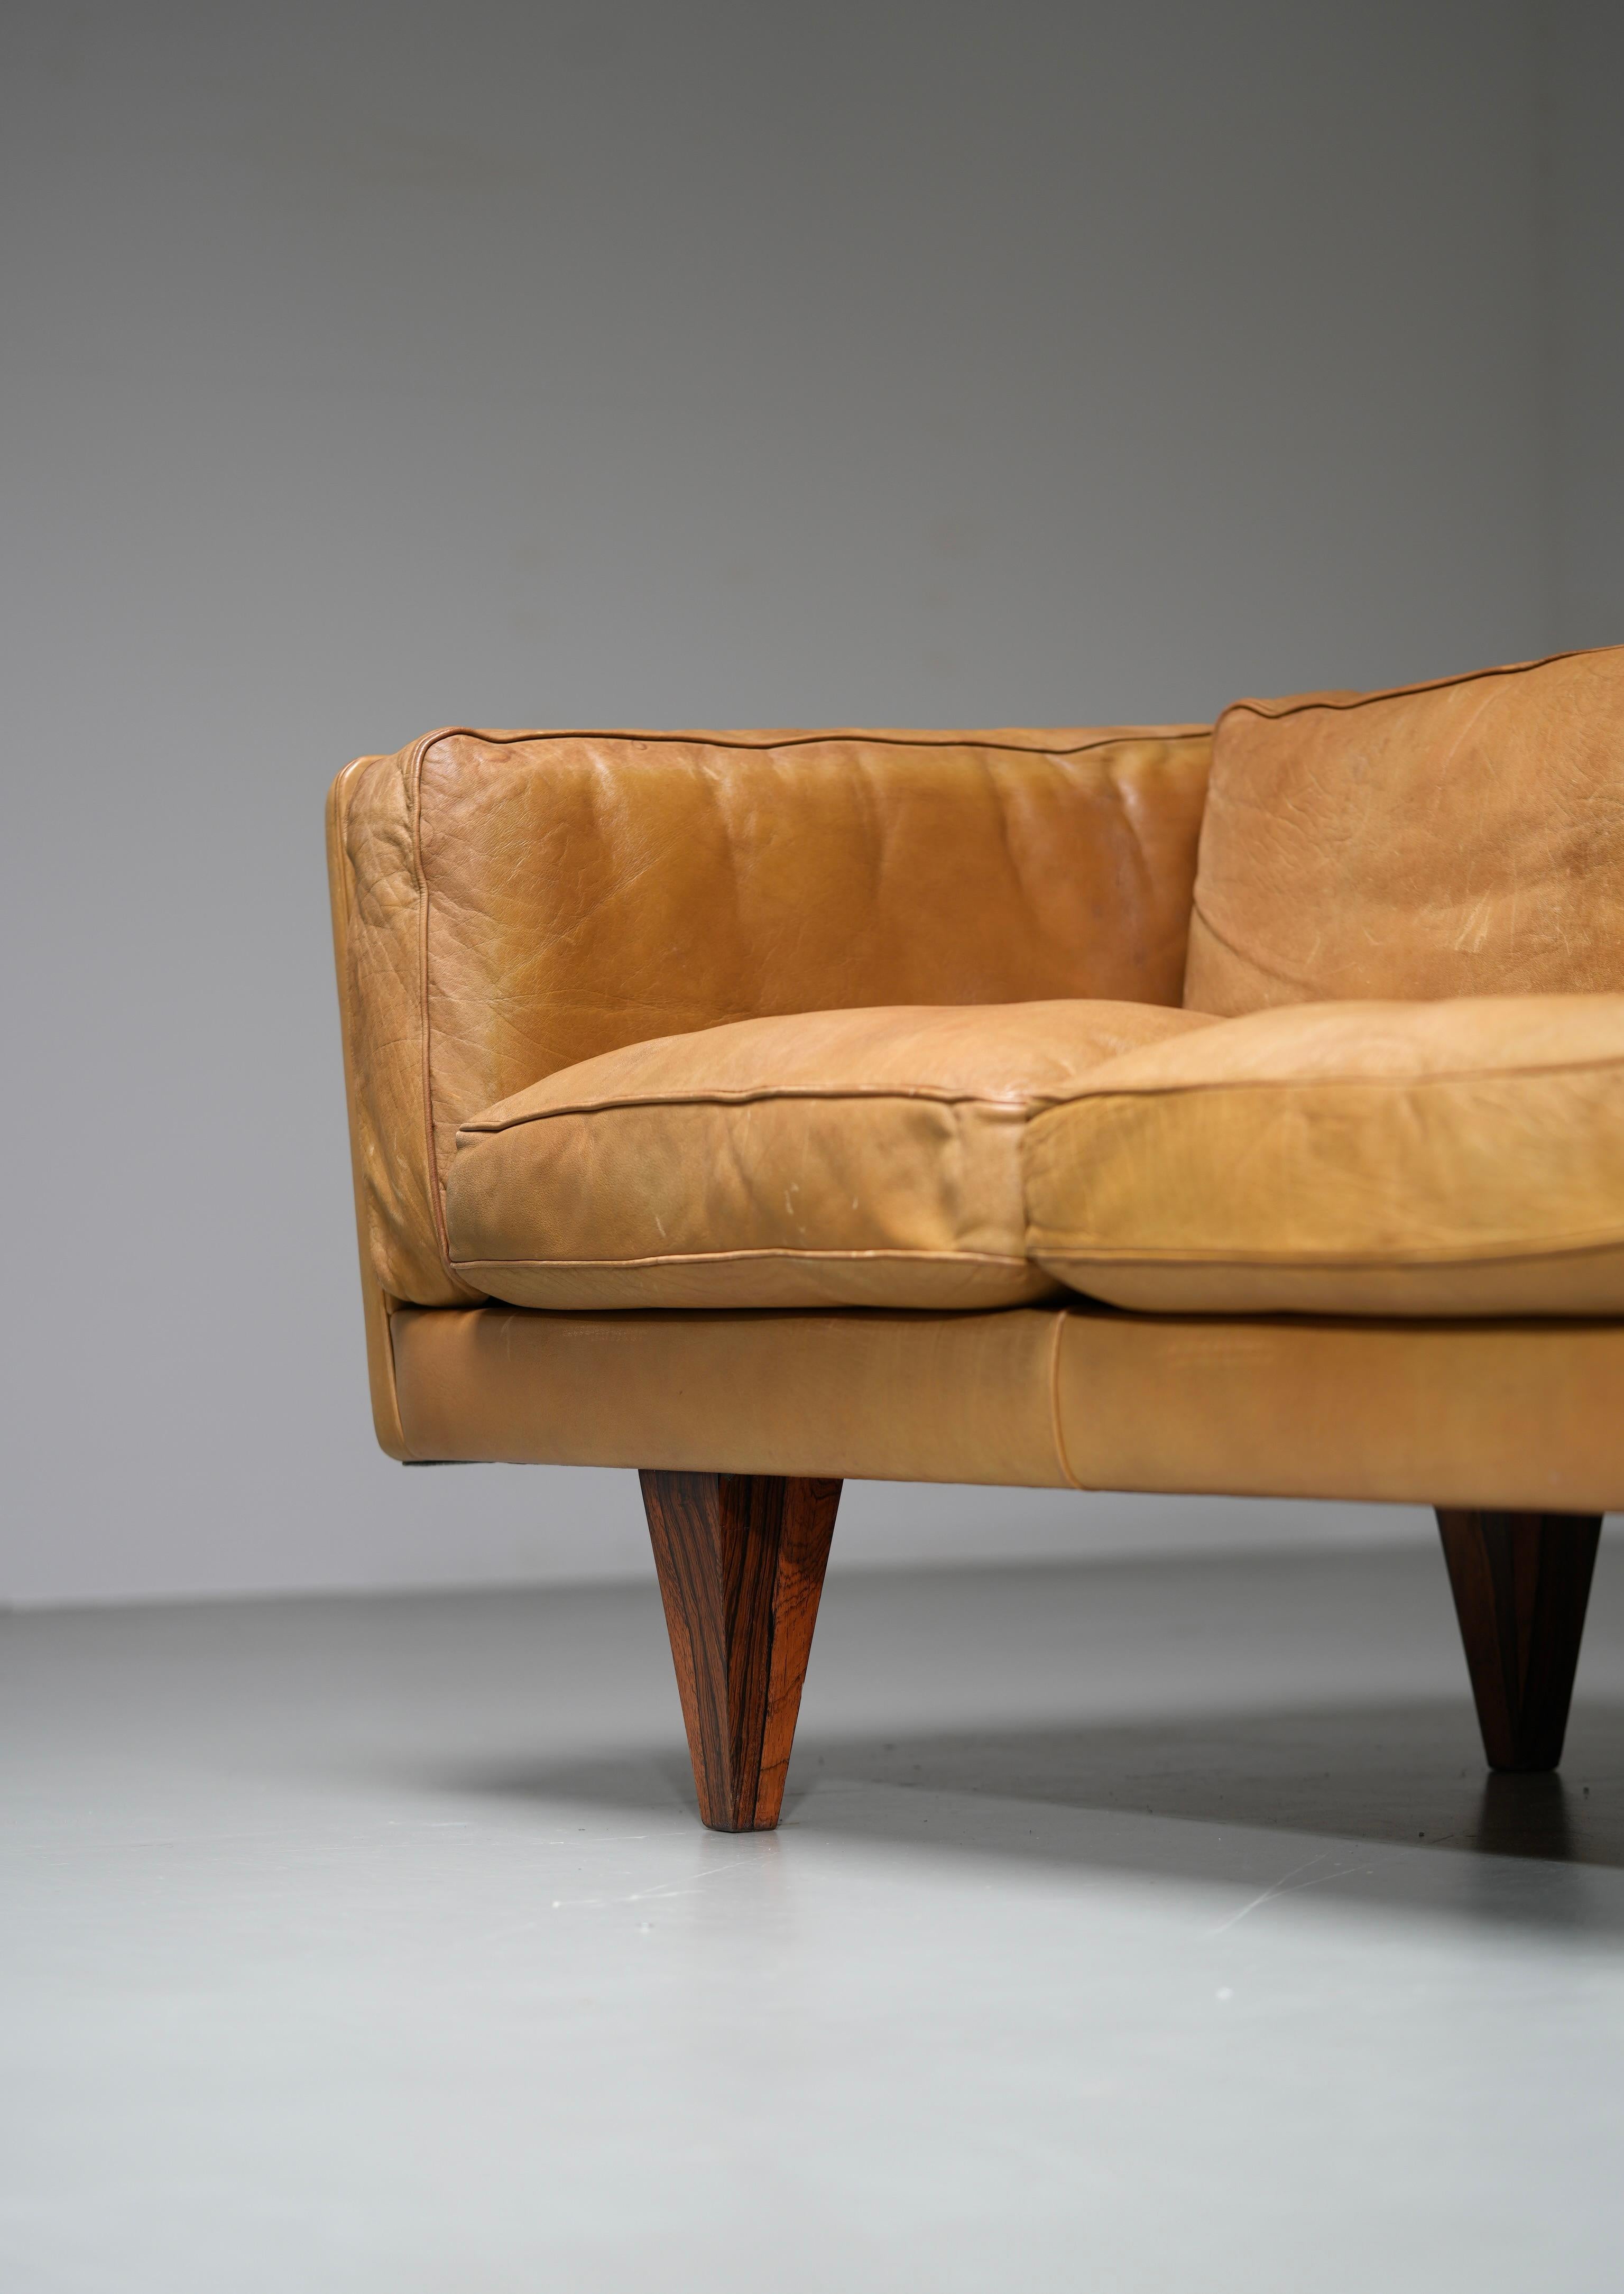 Illum Wikkelsø Three-Seat ‘V11’ Sofa in Cognac Leather, Denmark, 1960s In Good Condition For Sale In Amsterdam, NL